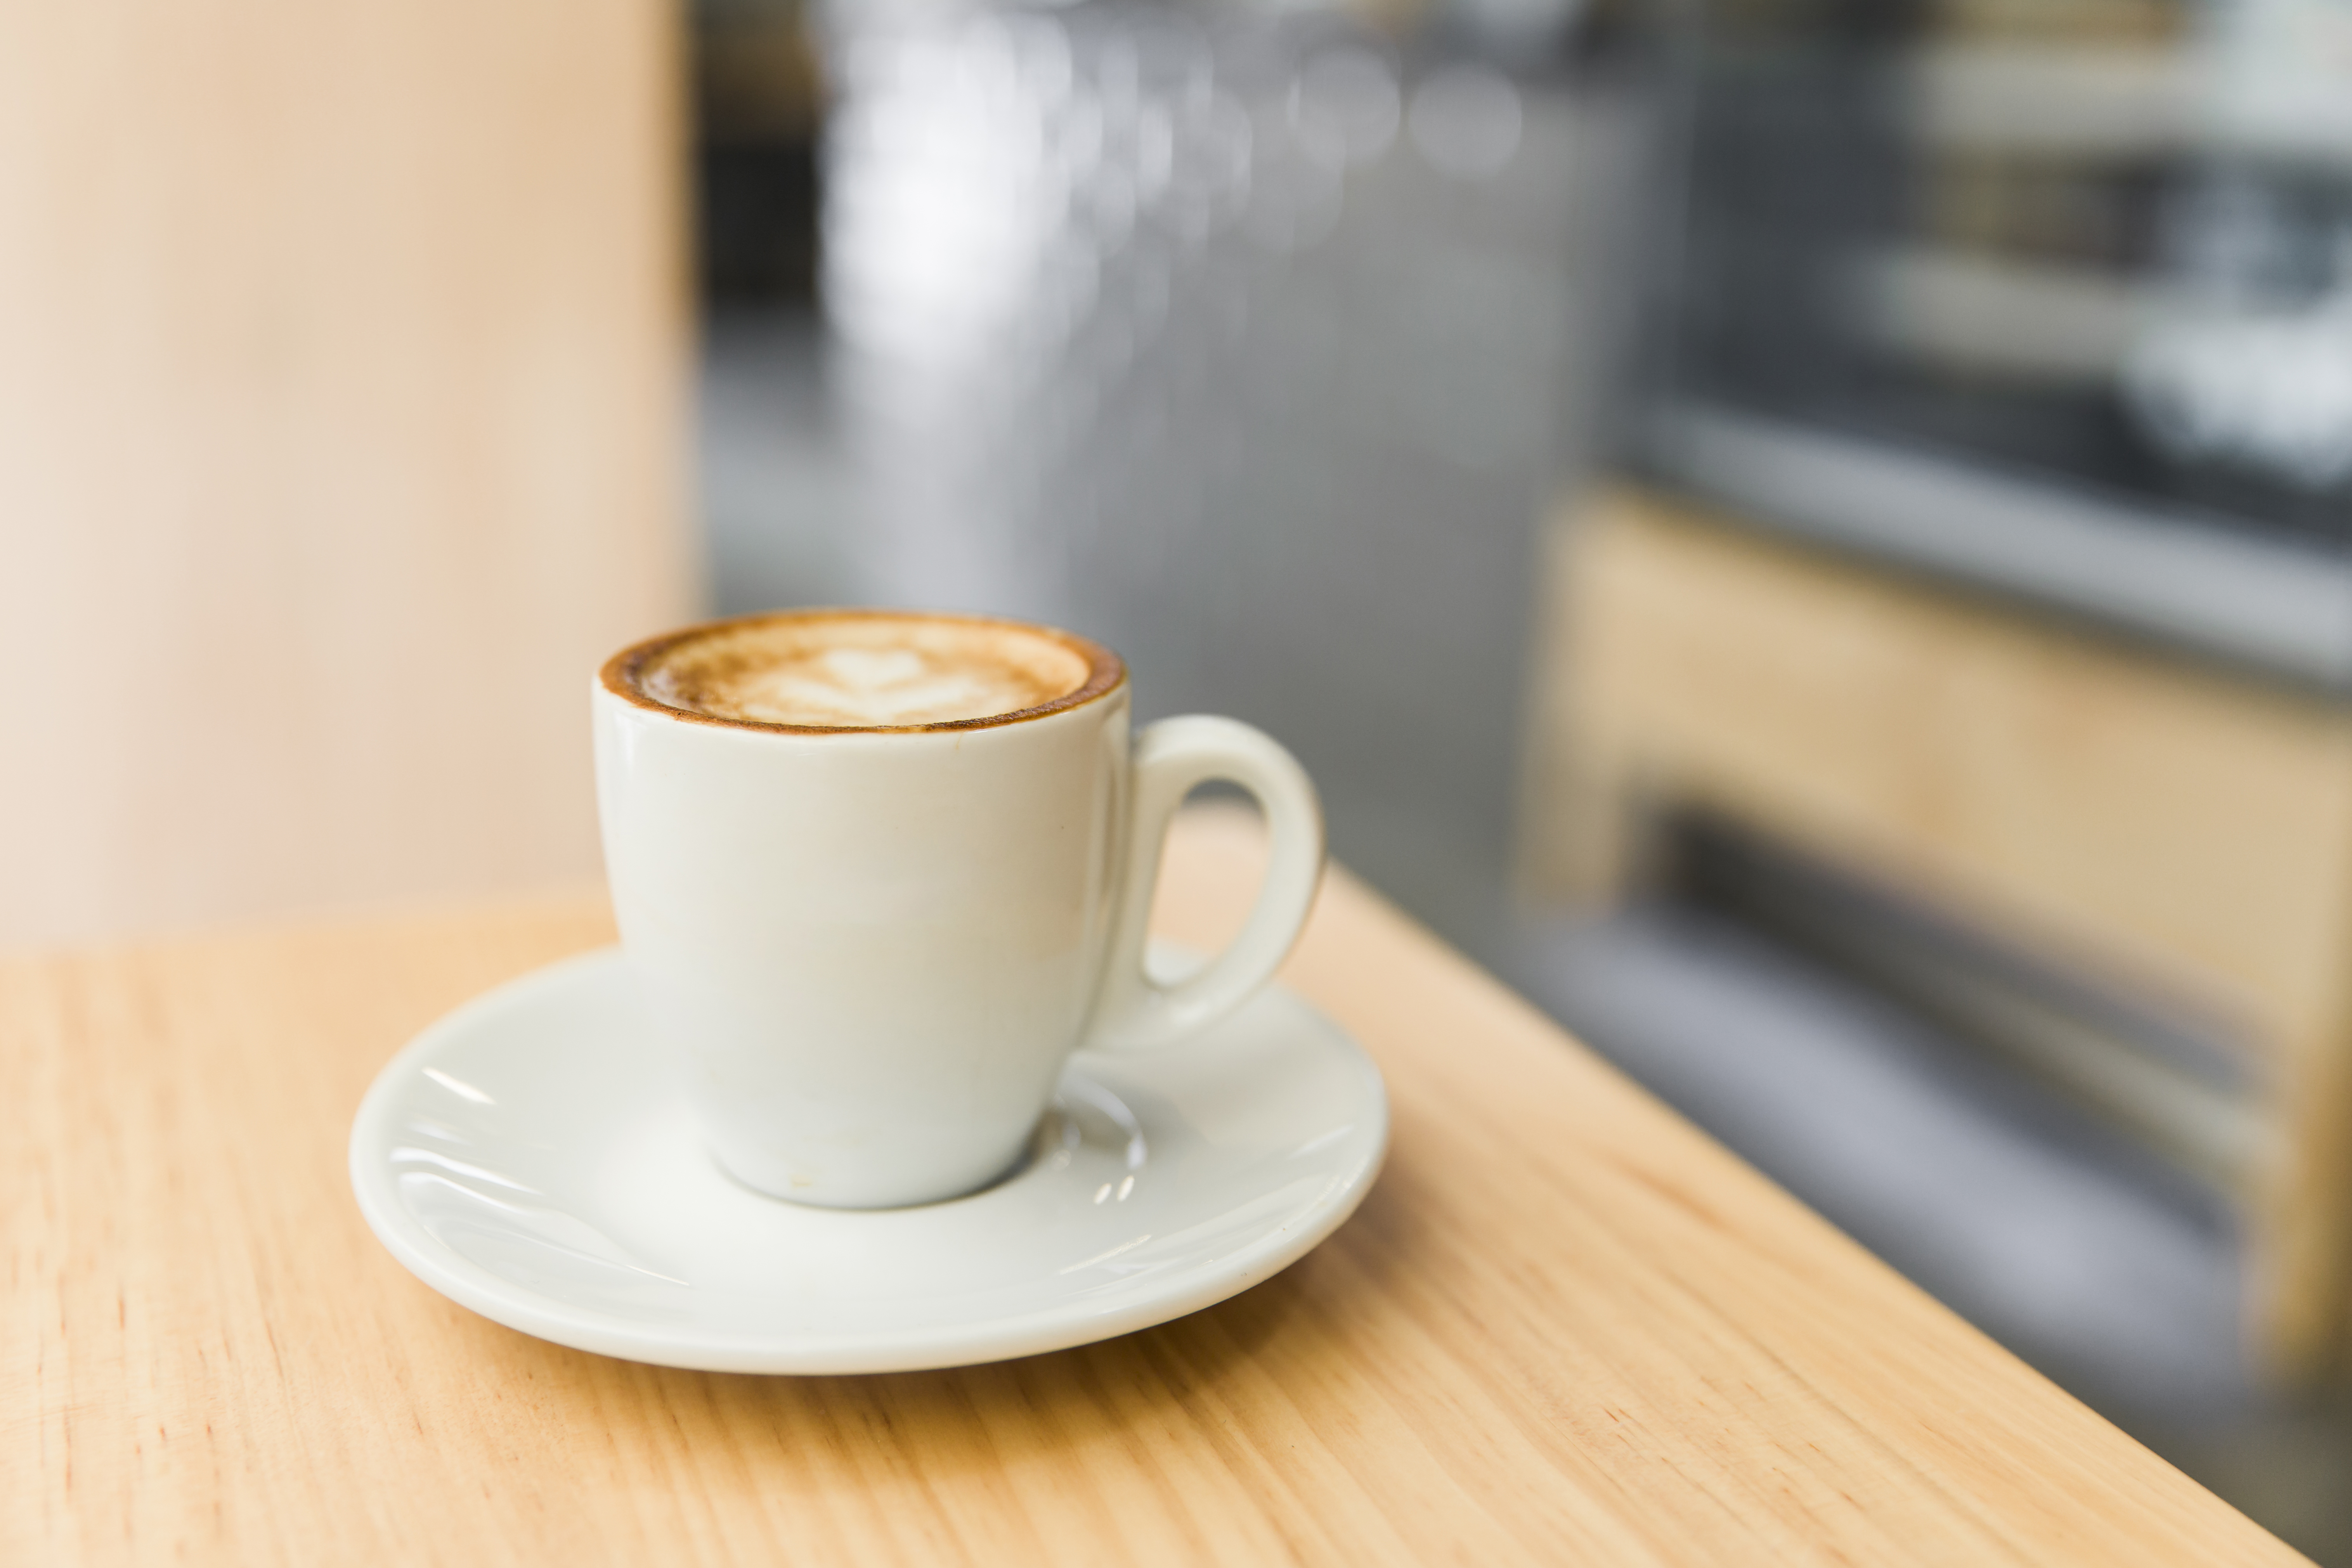 Make your Mornings easier with a Miele Coffee Machine